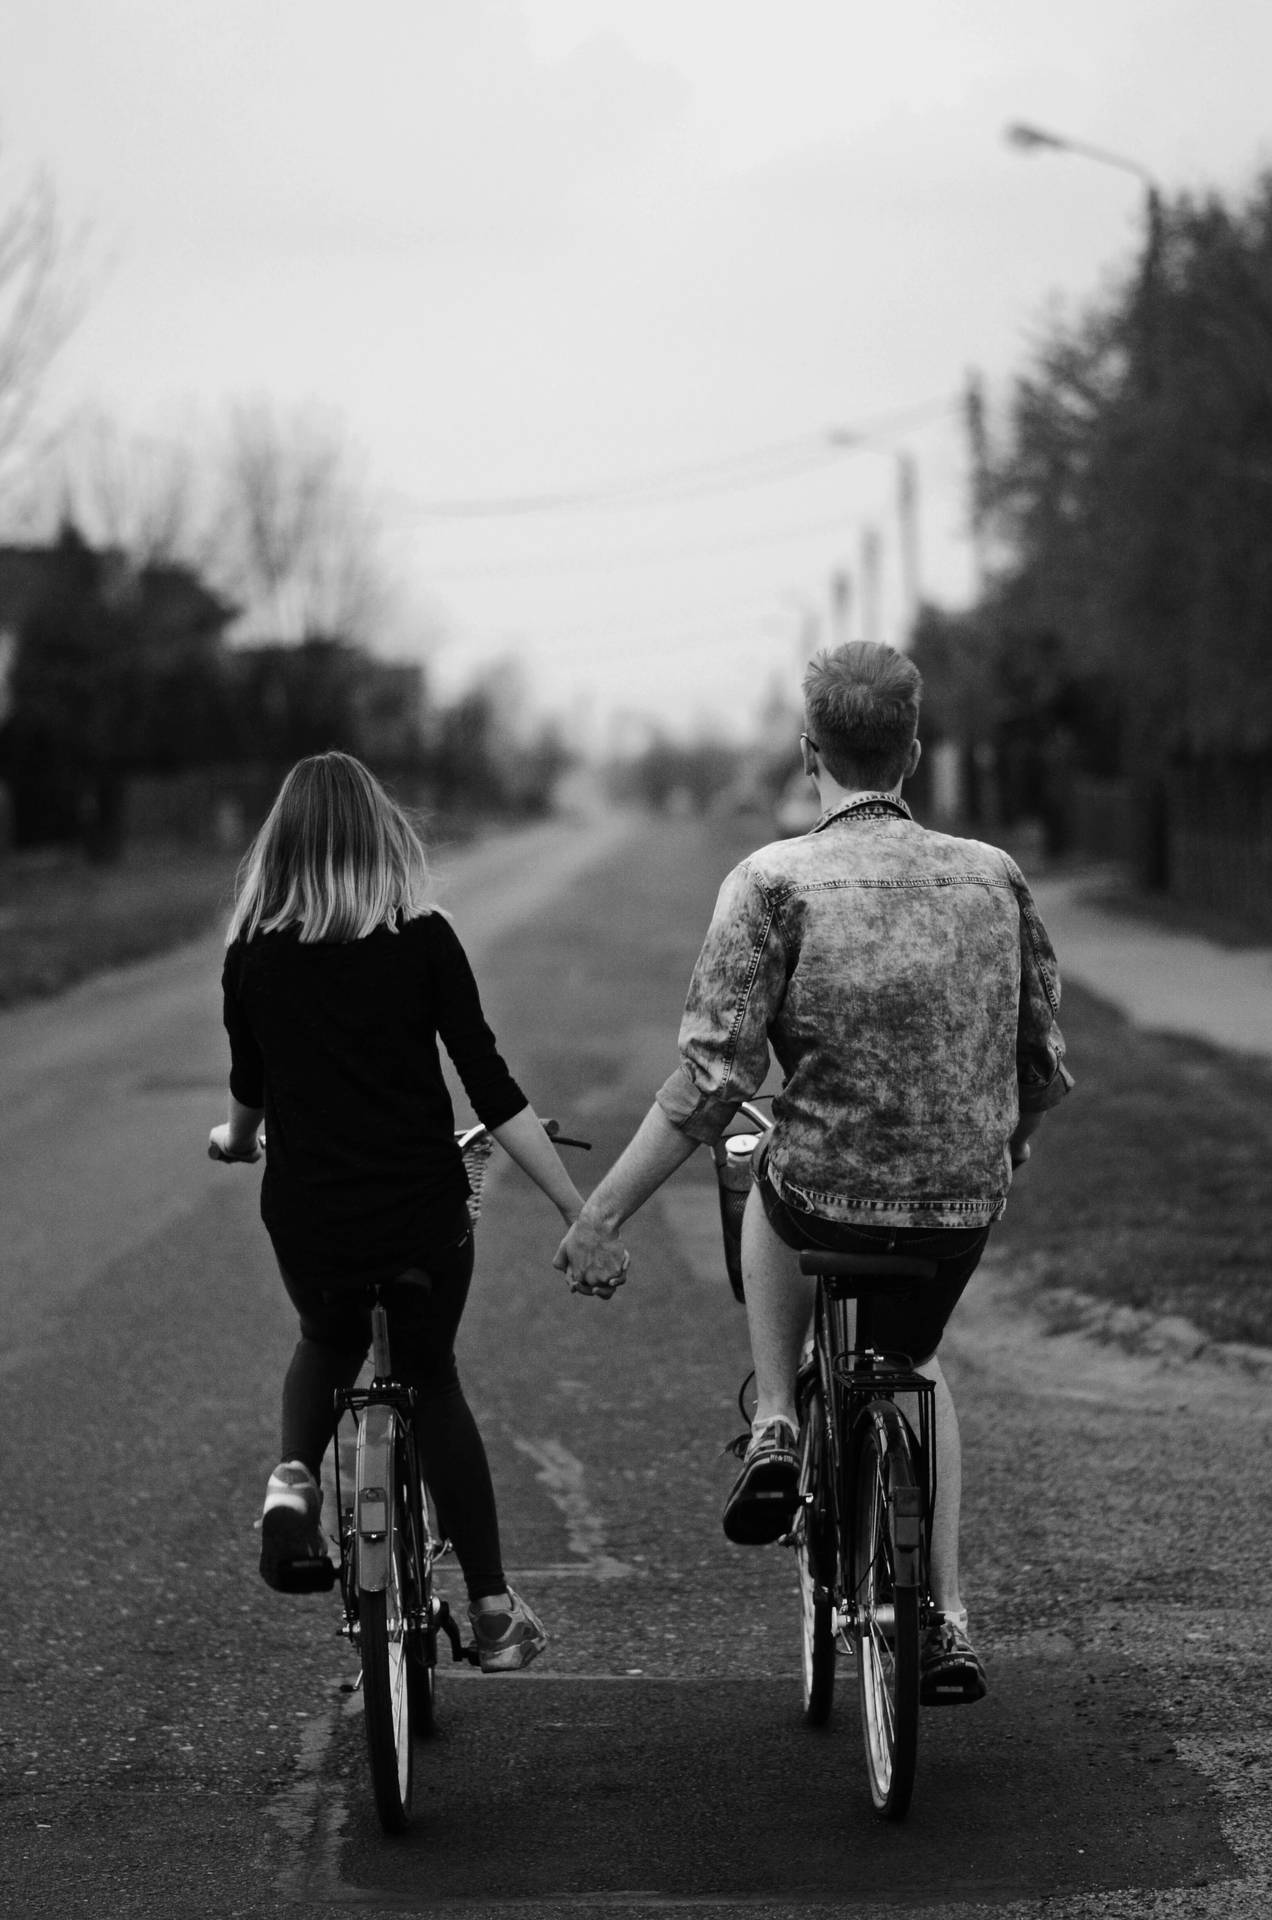 Black And White Holding Hands While Riding Bikes Wallpaper